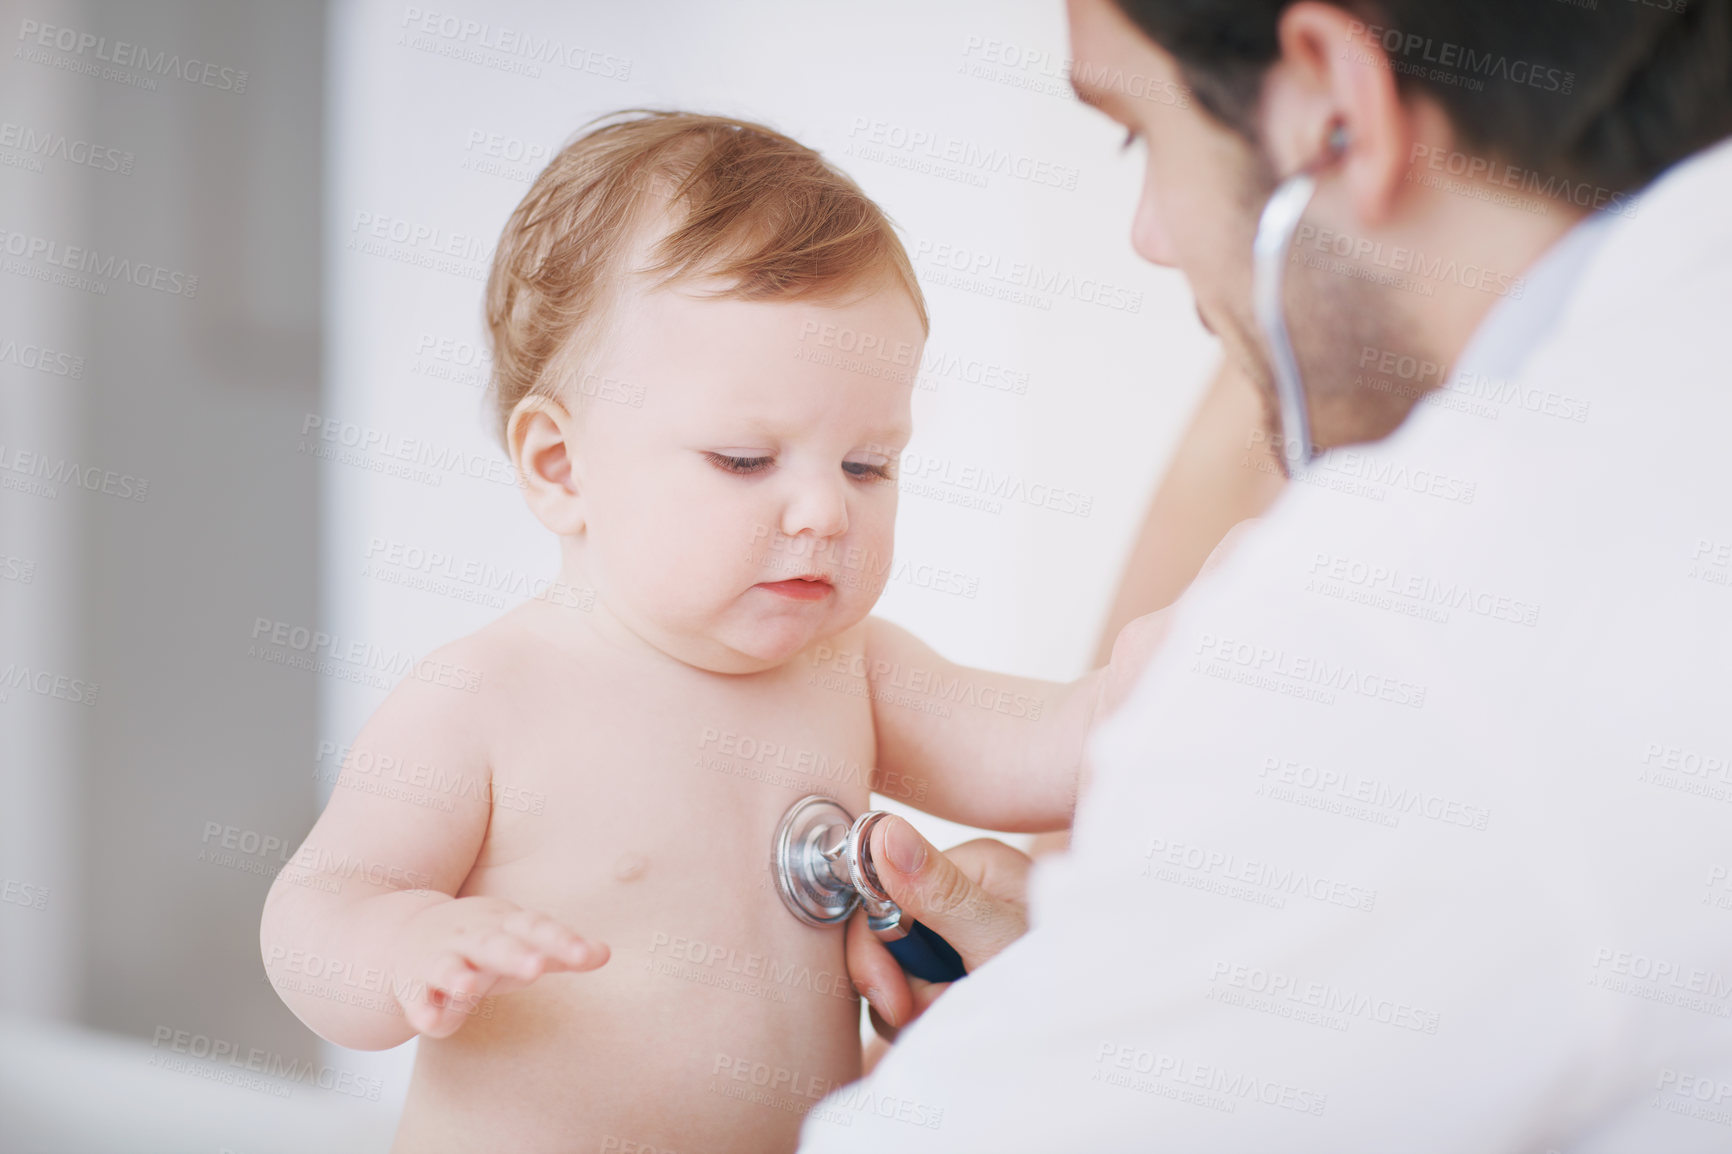 Buy stock photo A male doctor examining an infant girl with a stethoscope